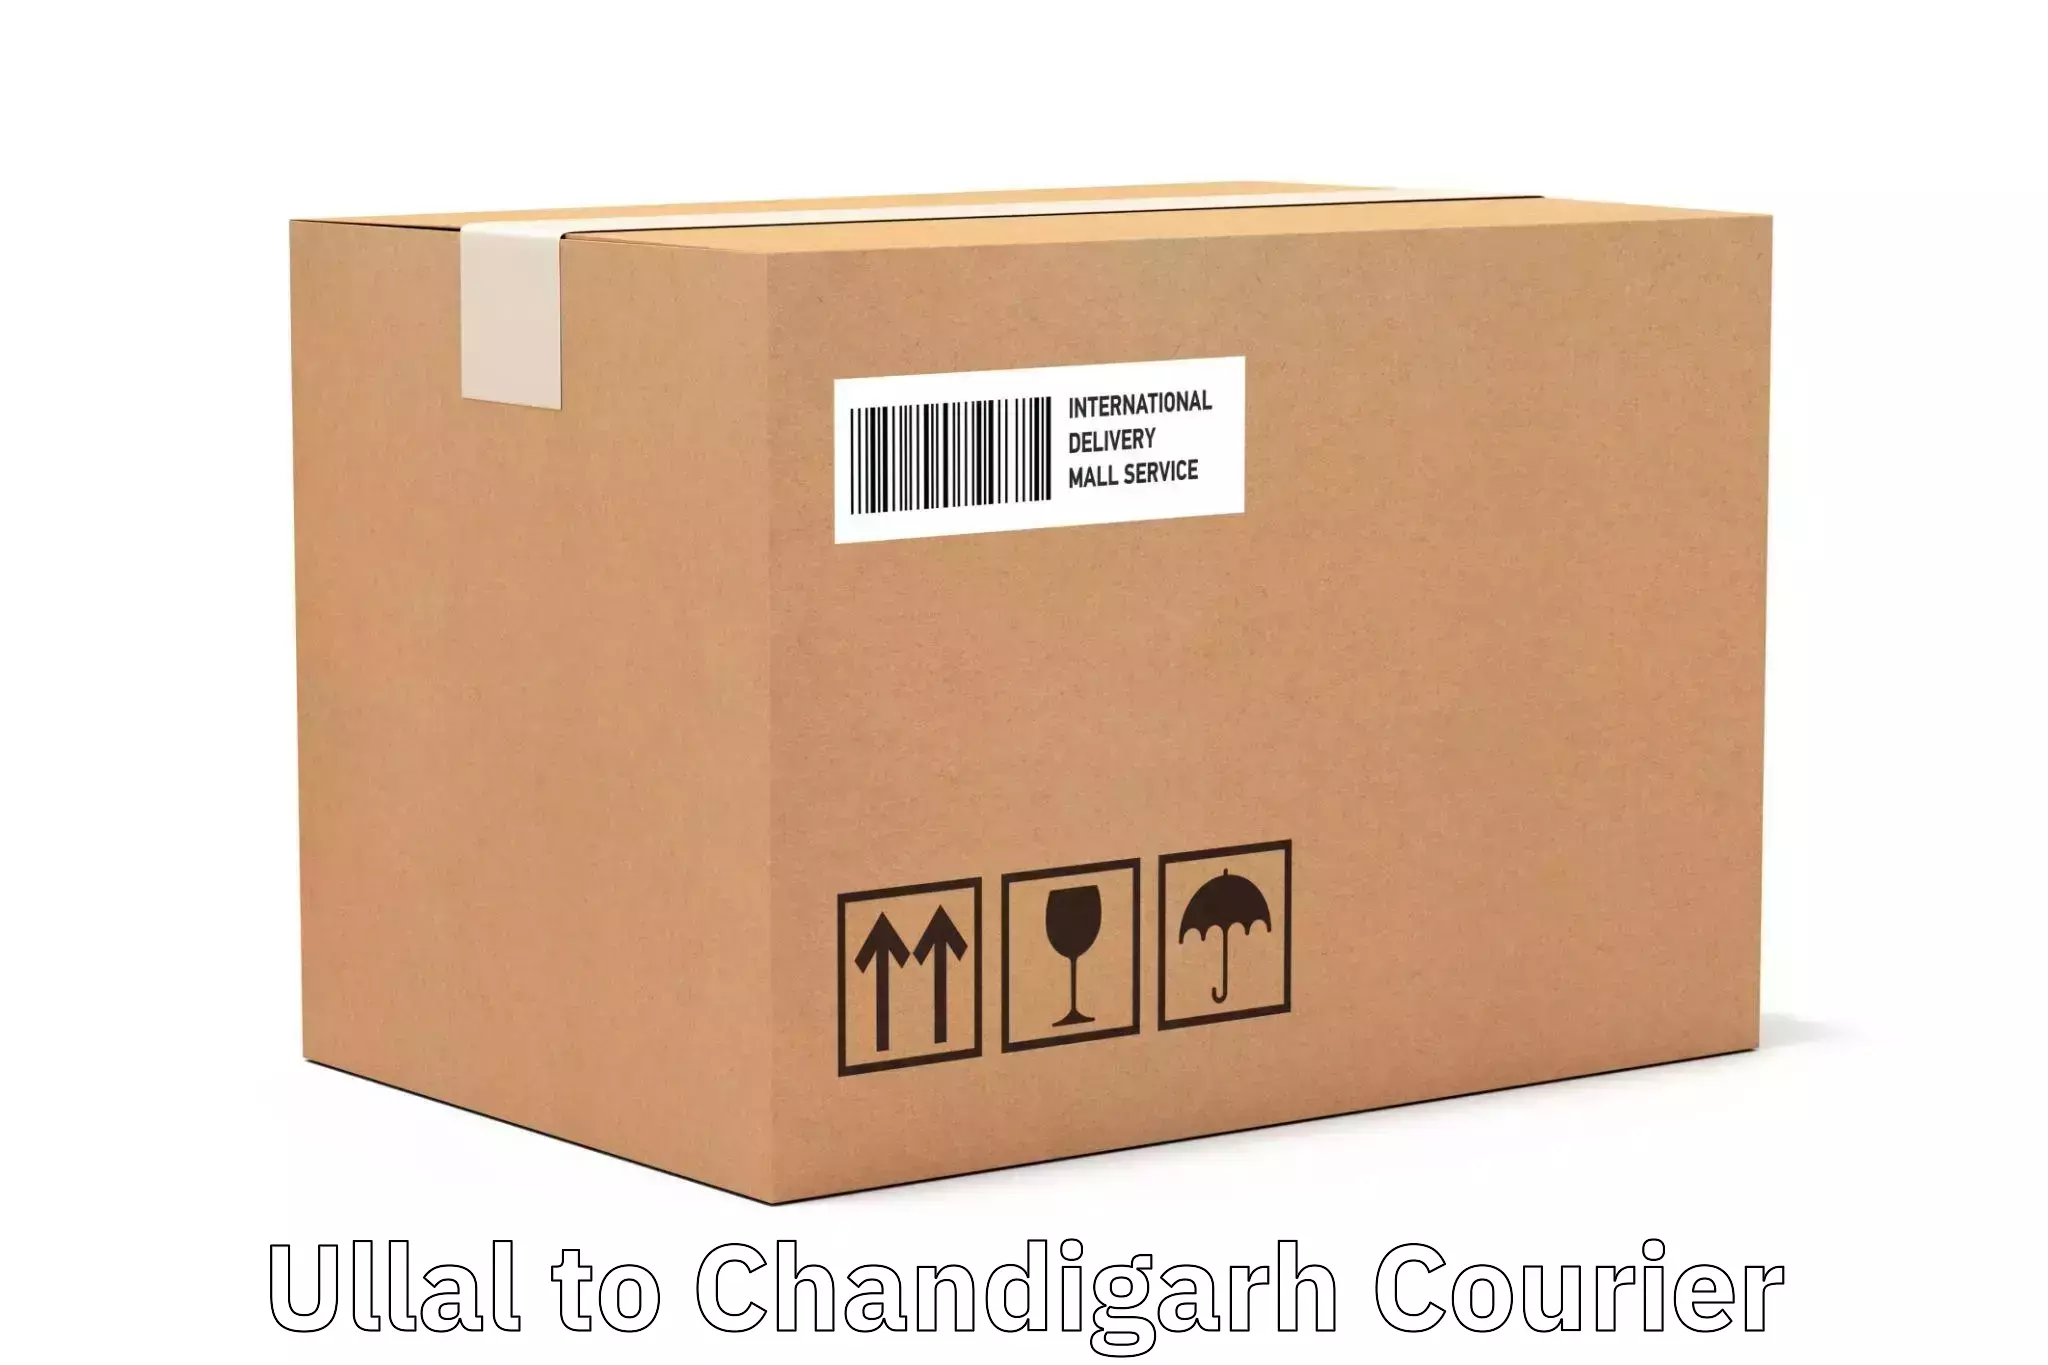 Lightweight parcel options Ullal to Chandigarh